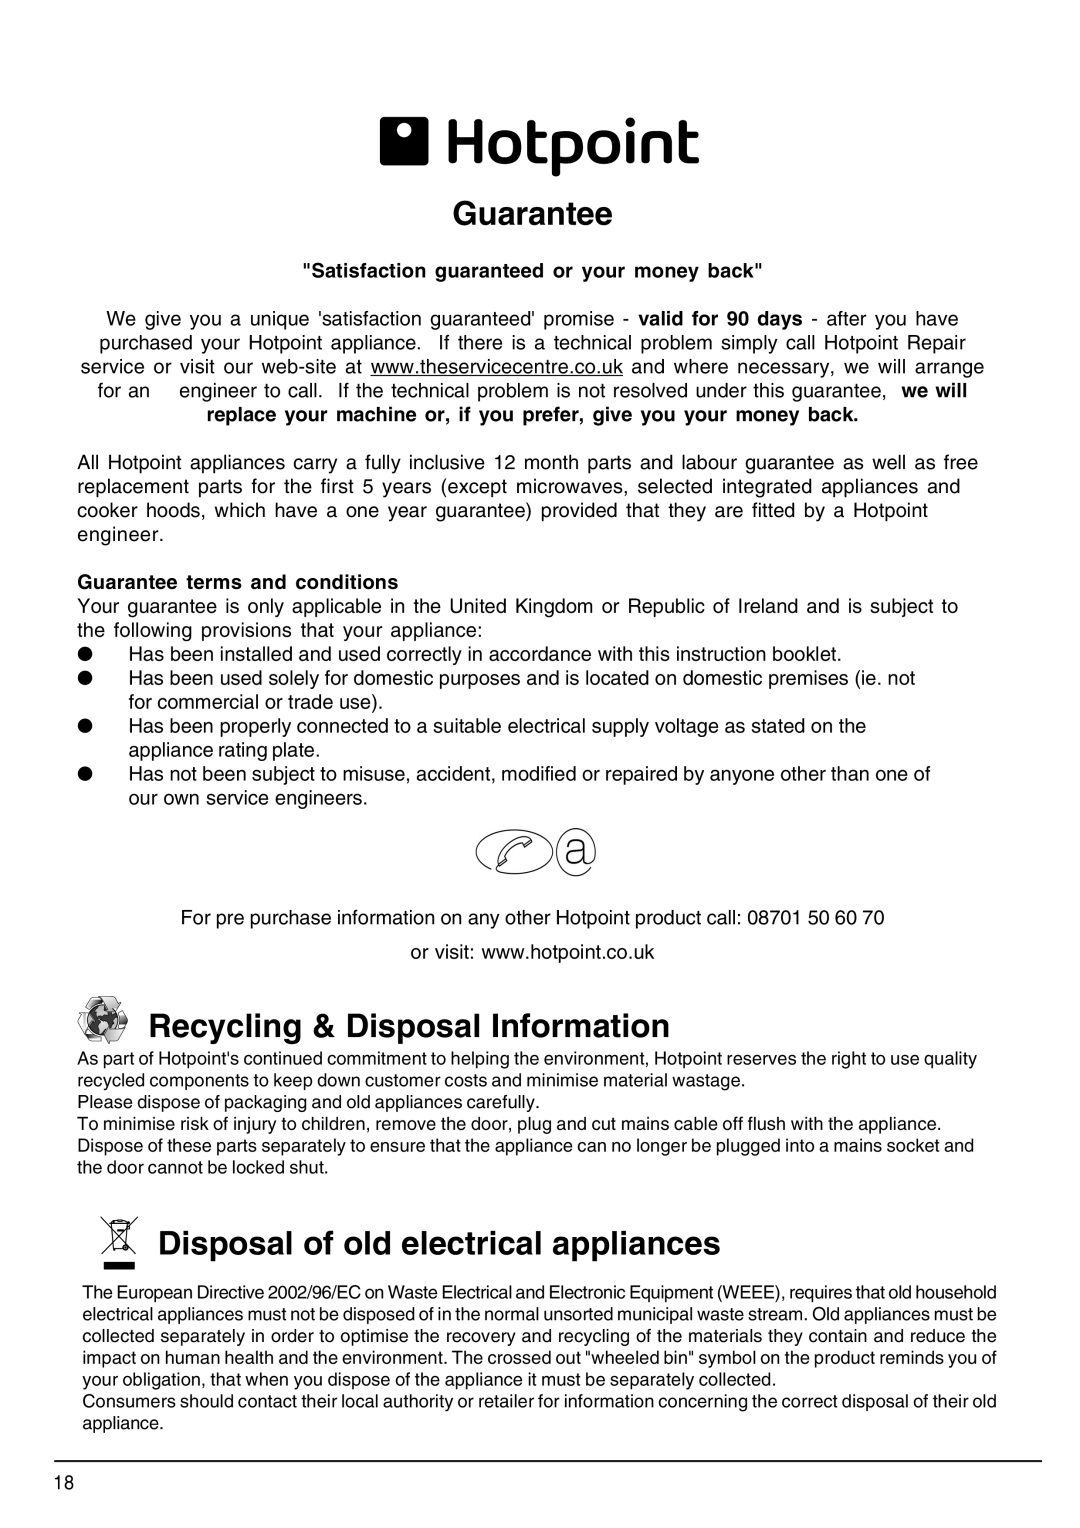 Indesit SDW80, SDW85 manual Guarantee, Recycling & Disposal Information, Disposal of old electrical appliances 